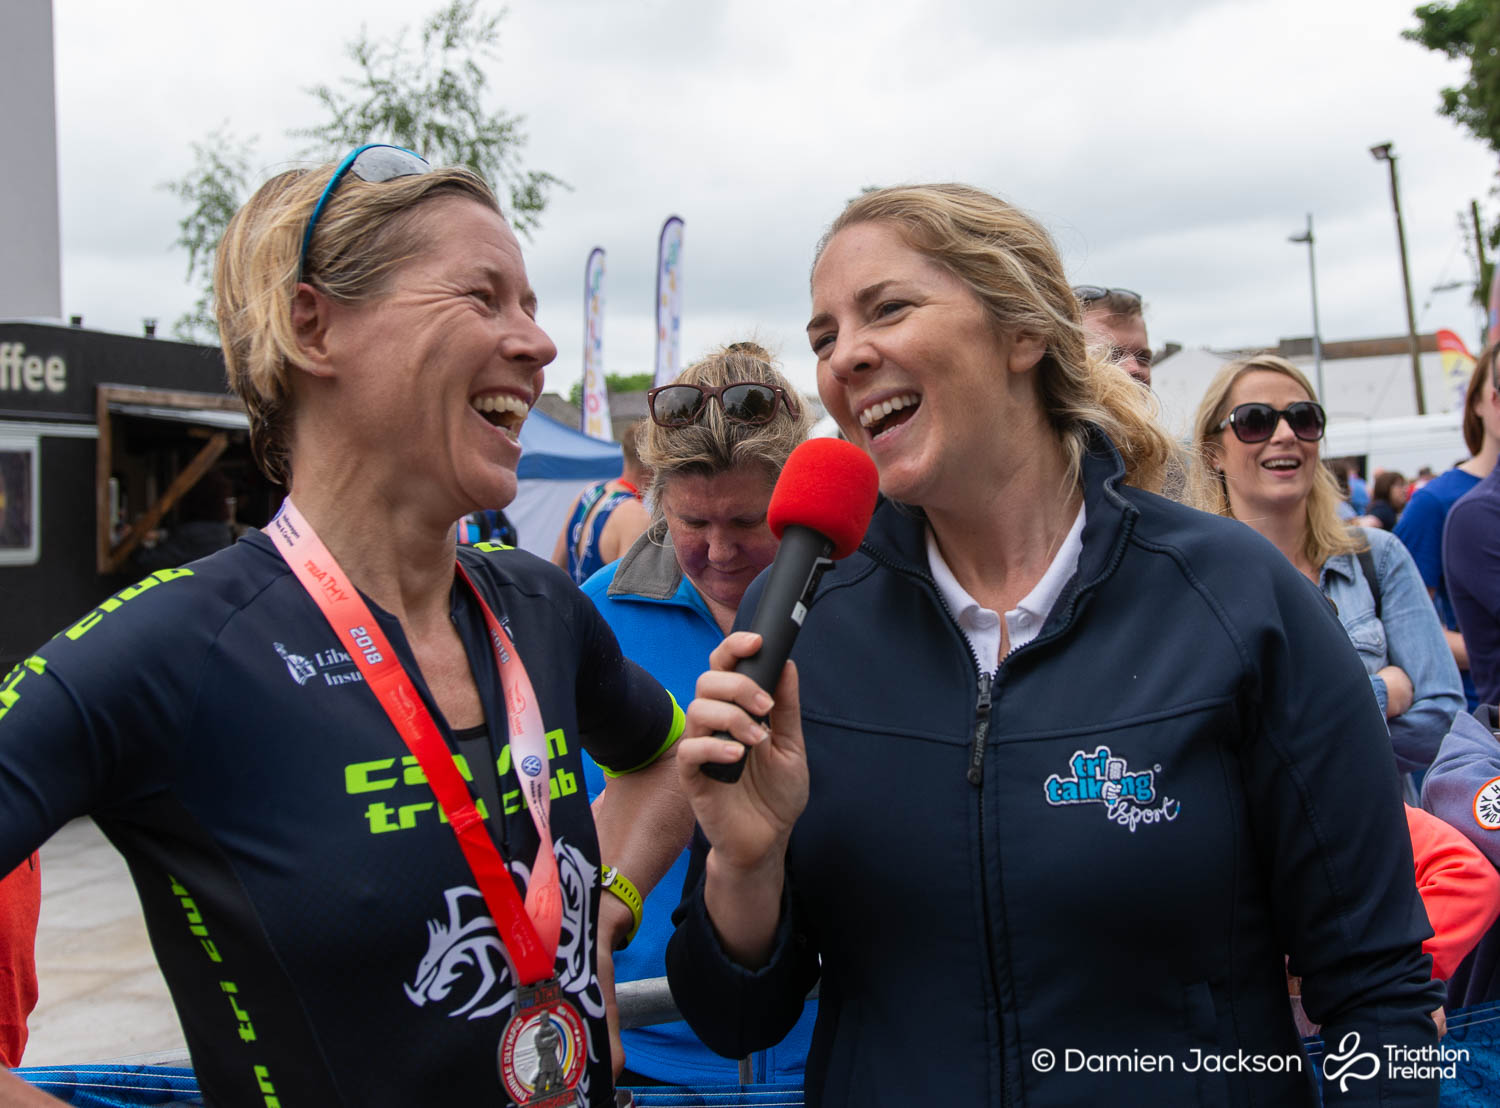 Athy_2018 (443 of 526) - TriAthy - XII Edition - 2nd June 2018